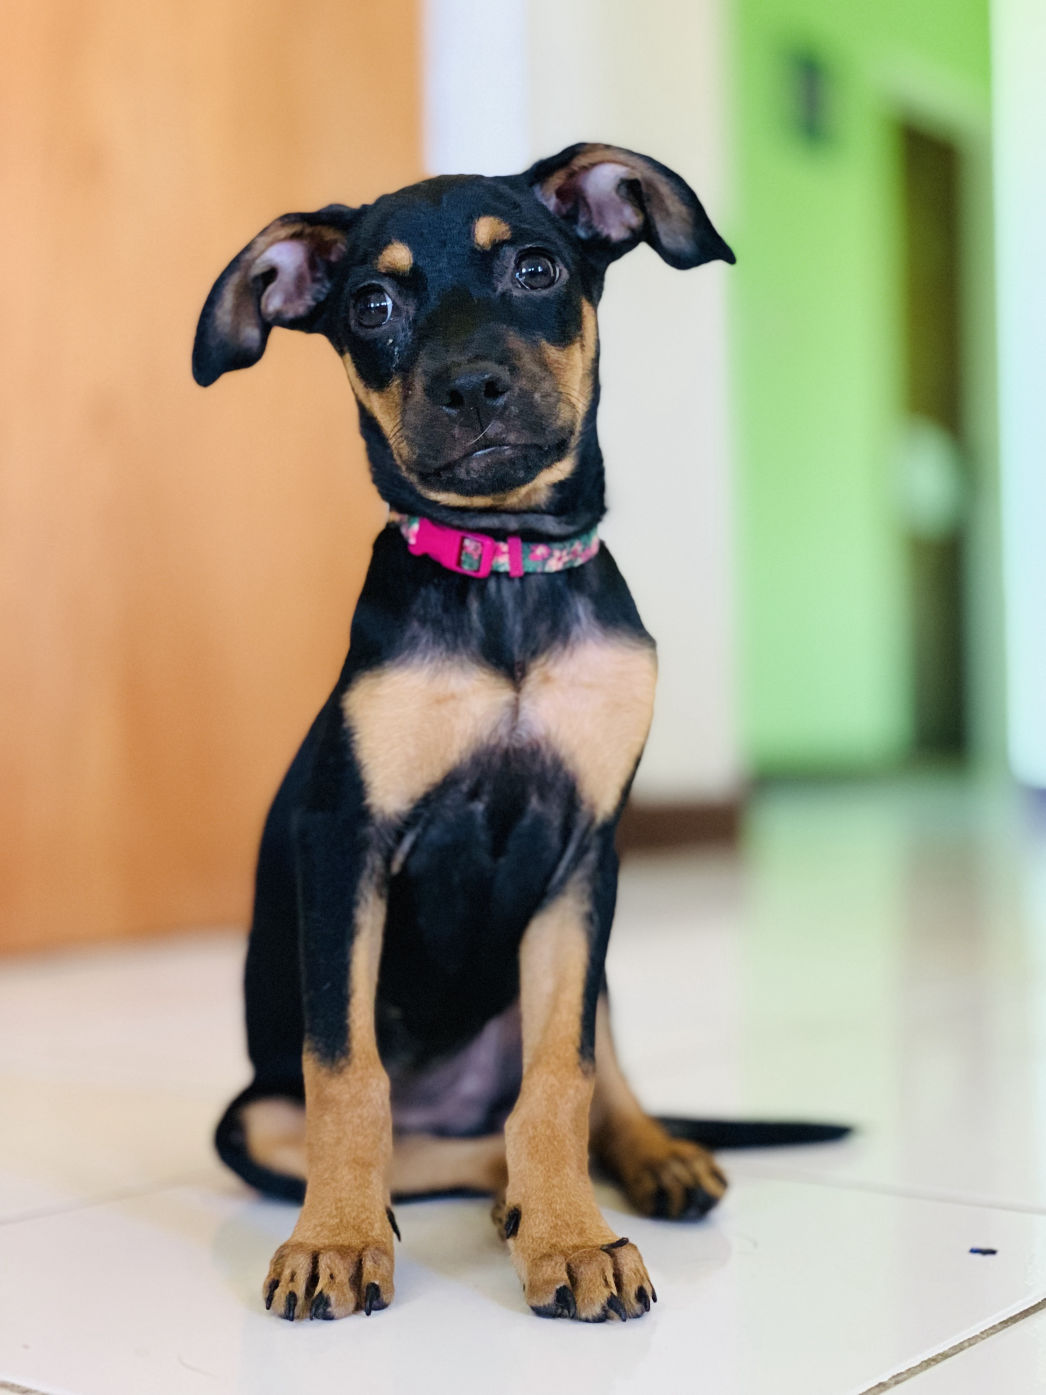 A black and brown Standard Anguilla Dog puppy